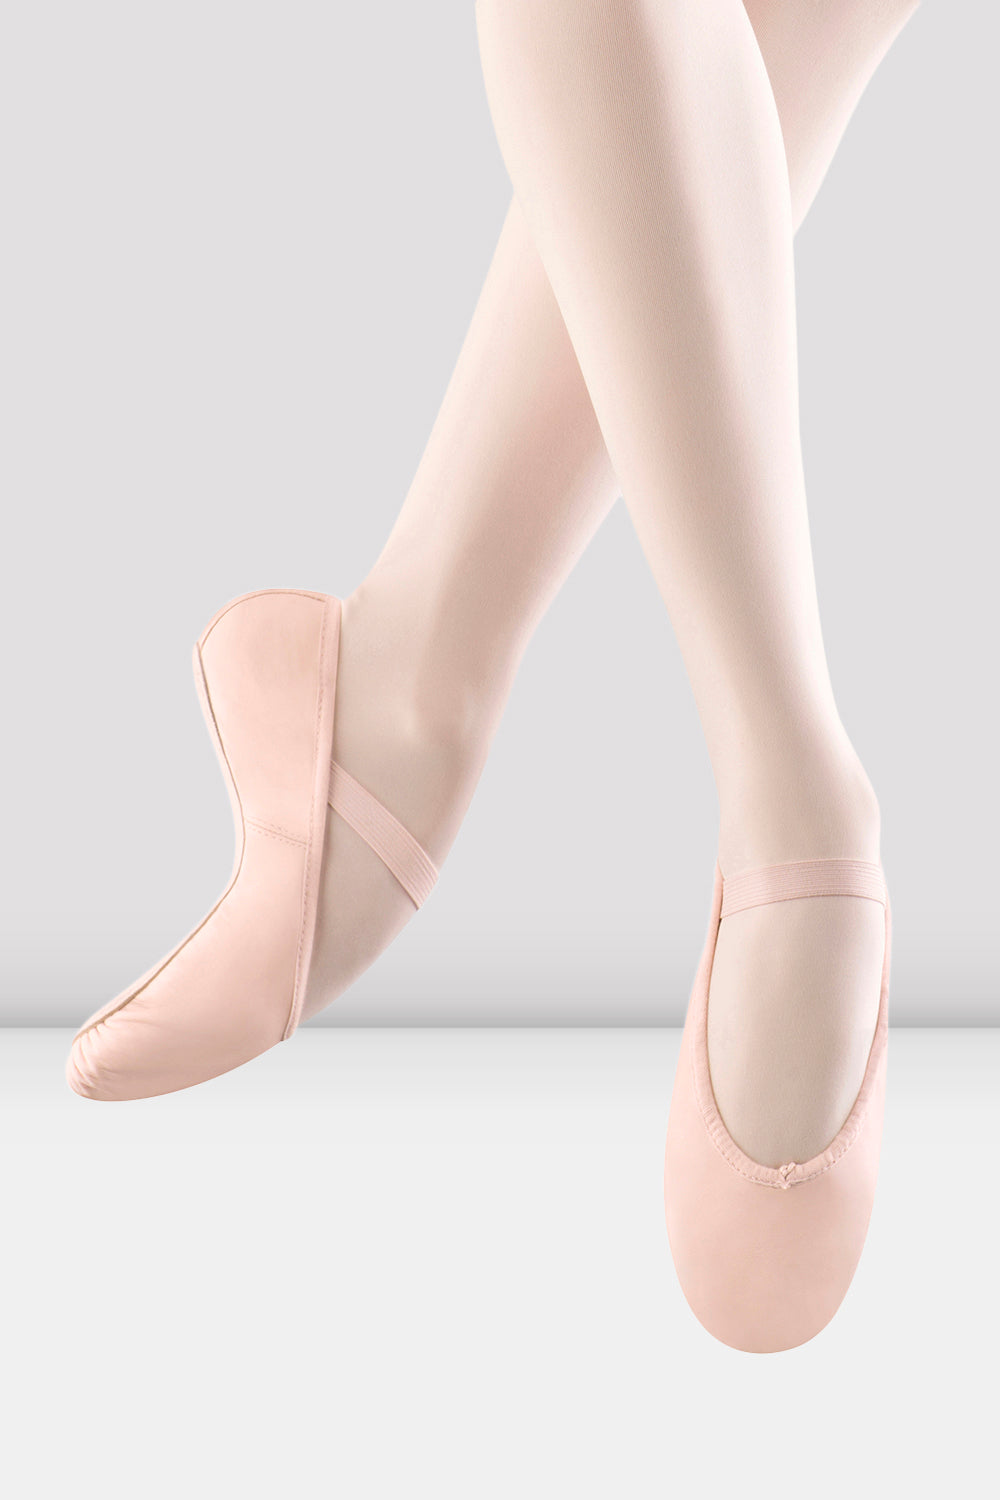 BLOCH Ladies Arise Leather Ballet Shoes, Theatrical Pink Leather